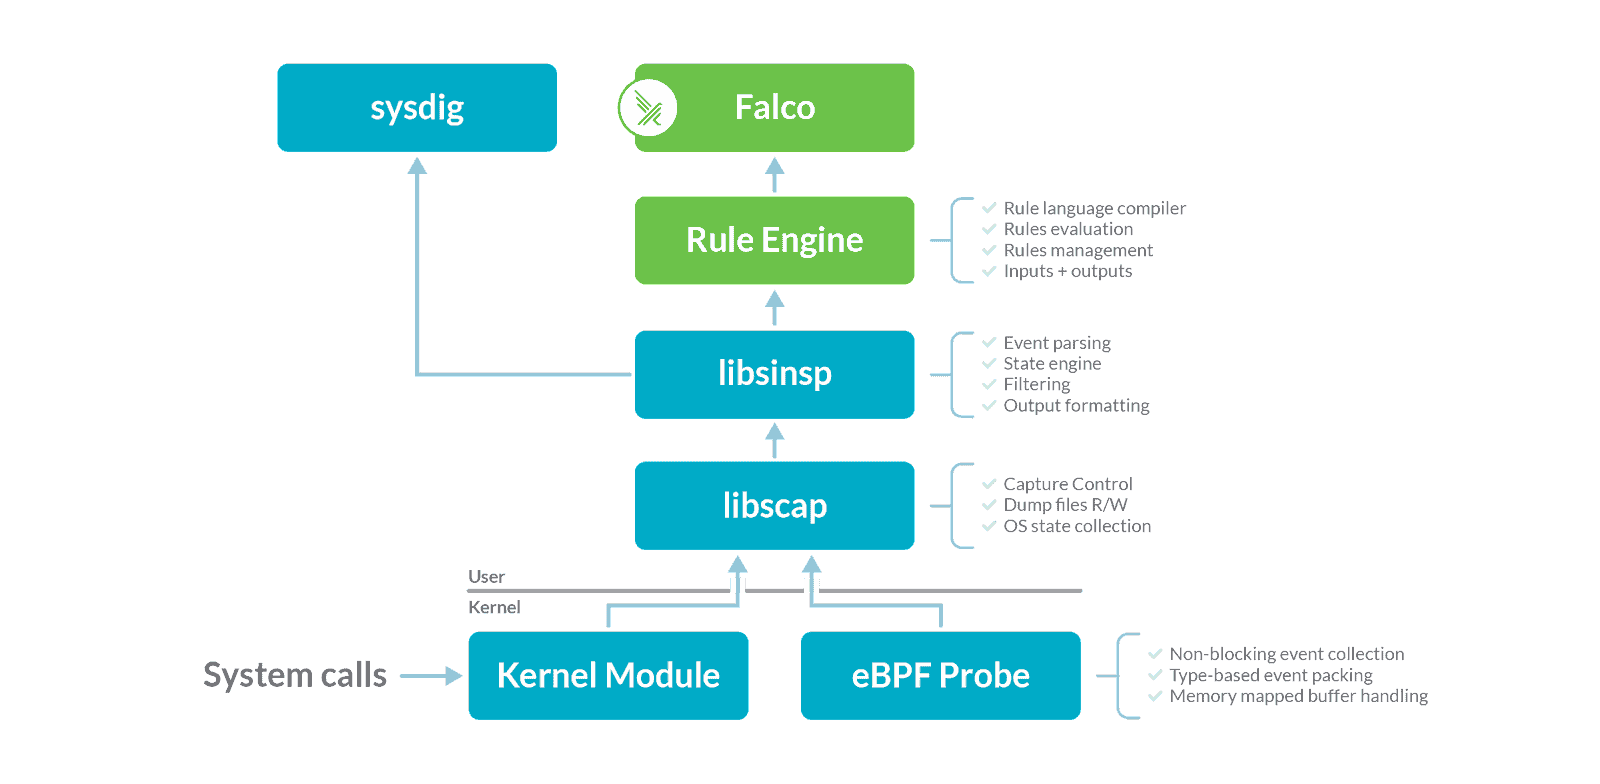 Diagram showing the main components at the base of Falco and Open Source sysdig